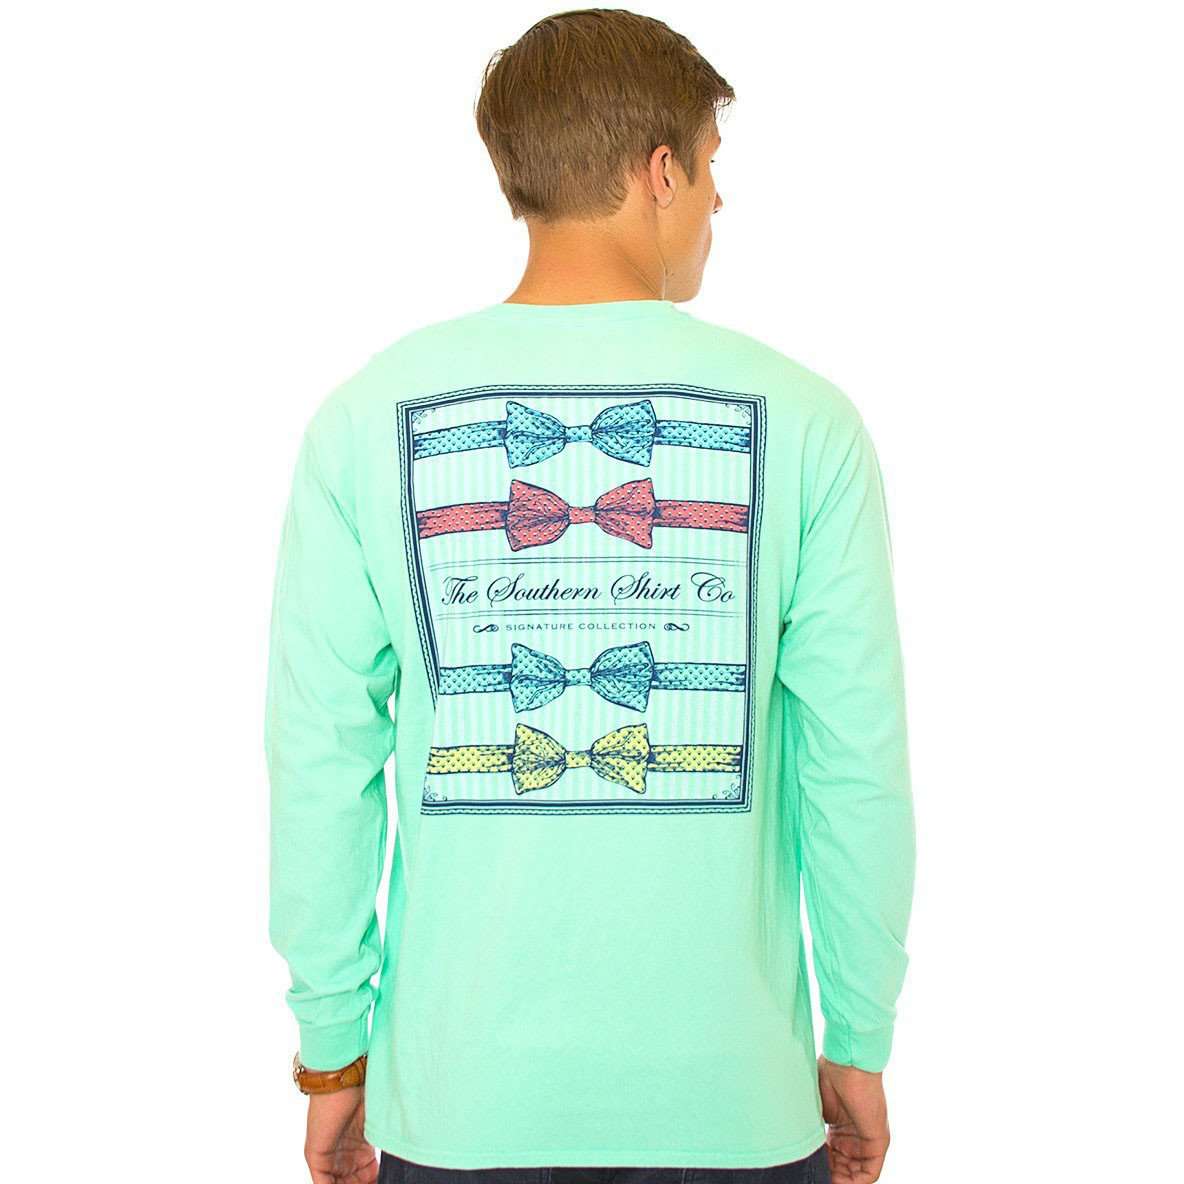 Southern Prep Long Sleeve Tee in Mint Green by The Southern Shirt Co. - Country Club Prep